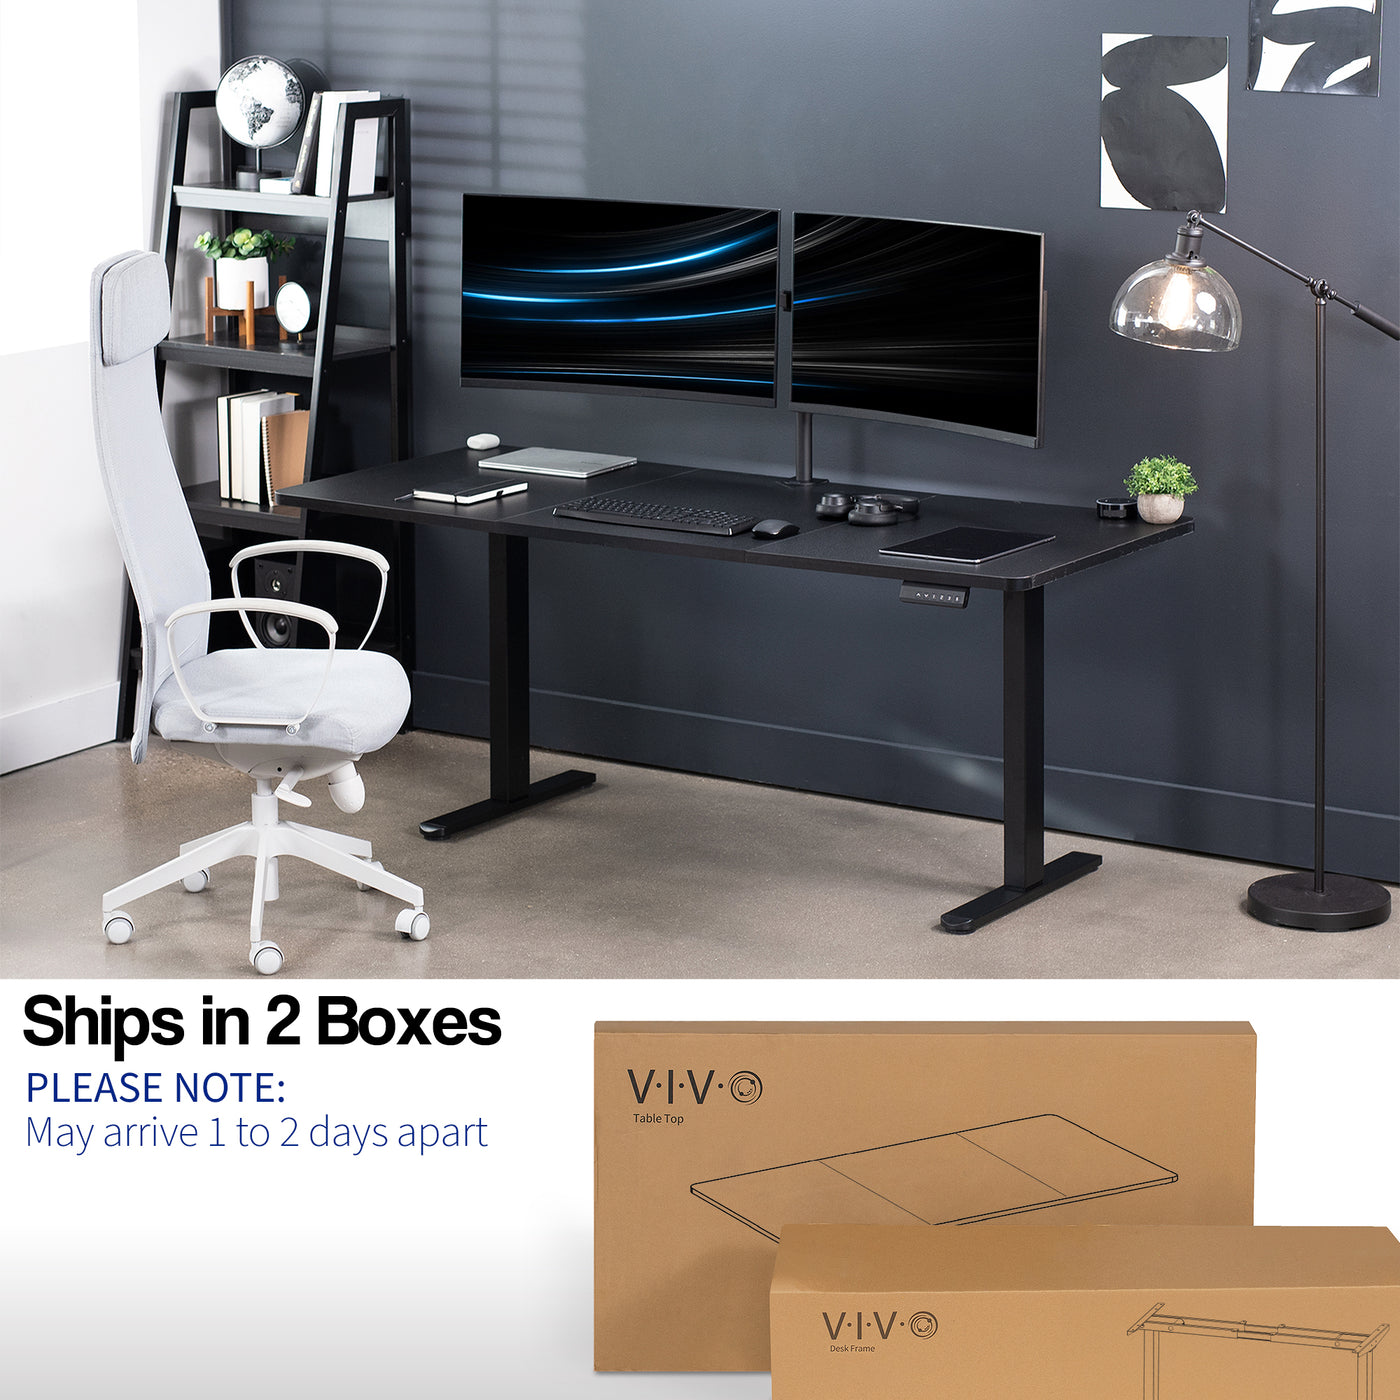 Desk parts ship in two separate boxes and may arrive on separate days.